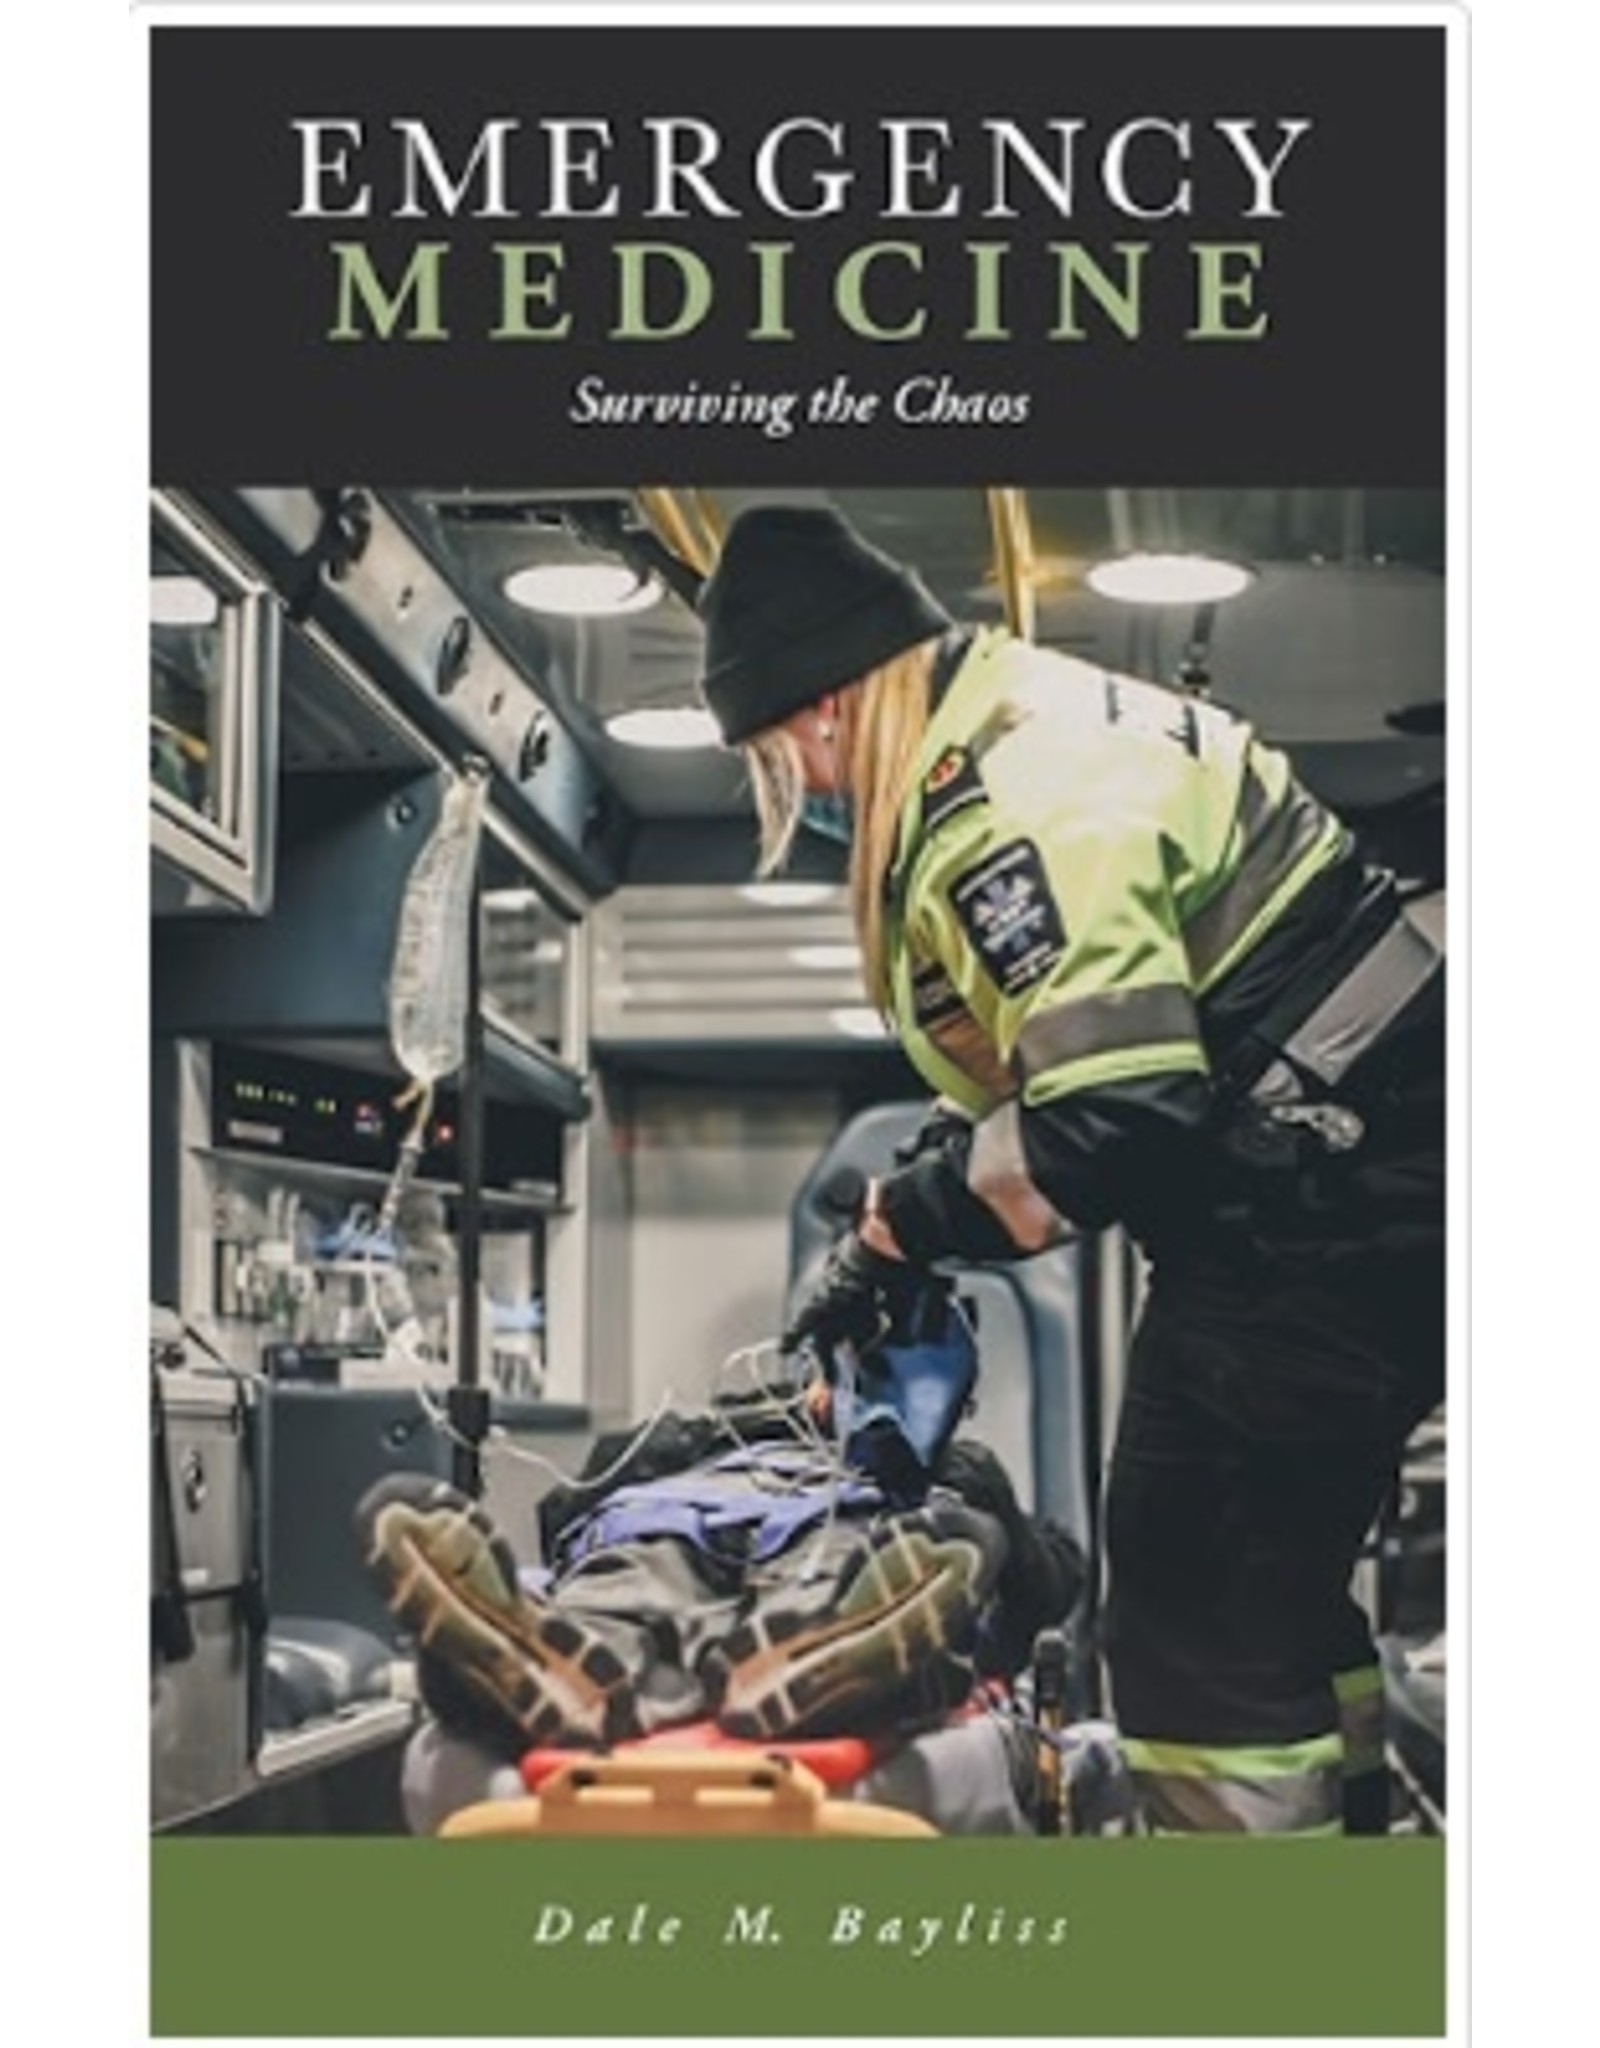 Emergency Medicine: Compassion, Courage and Chaos - by Dale M. Baylis